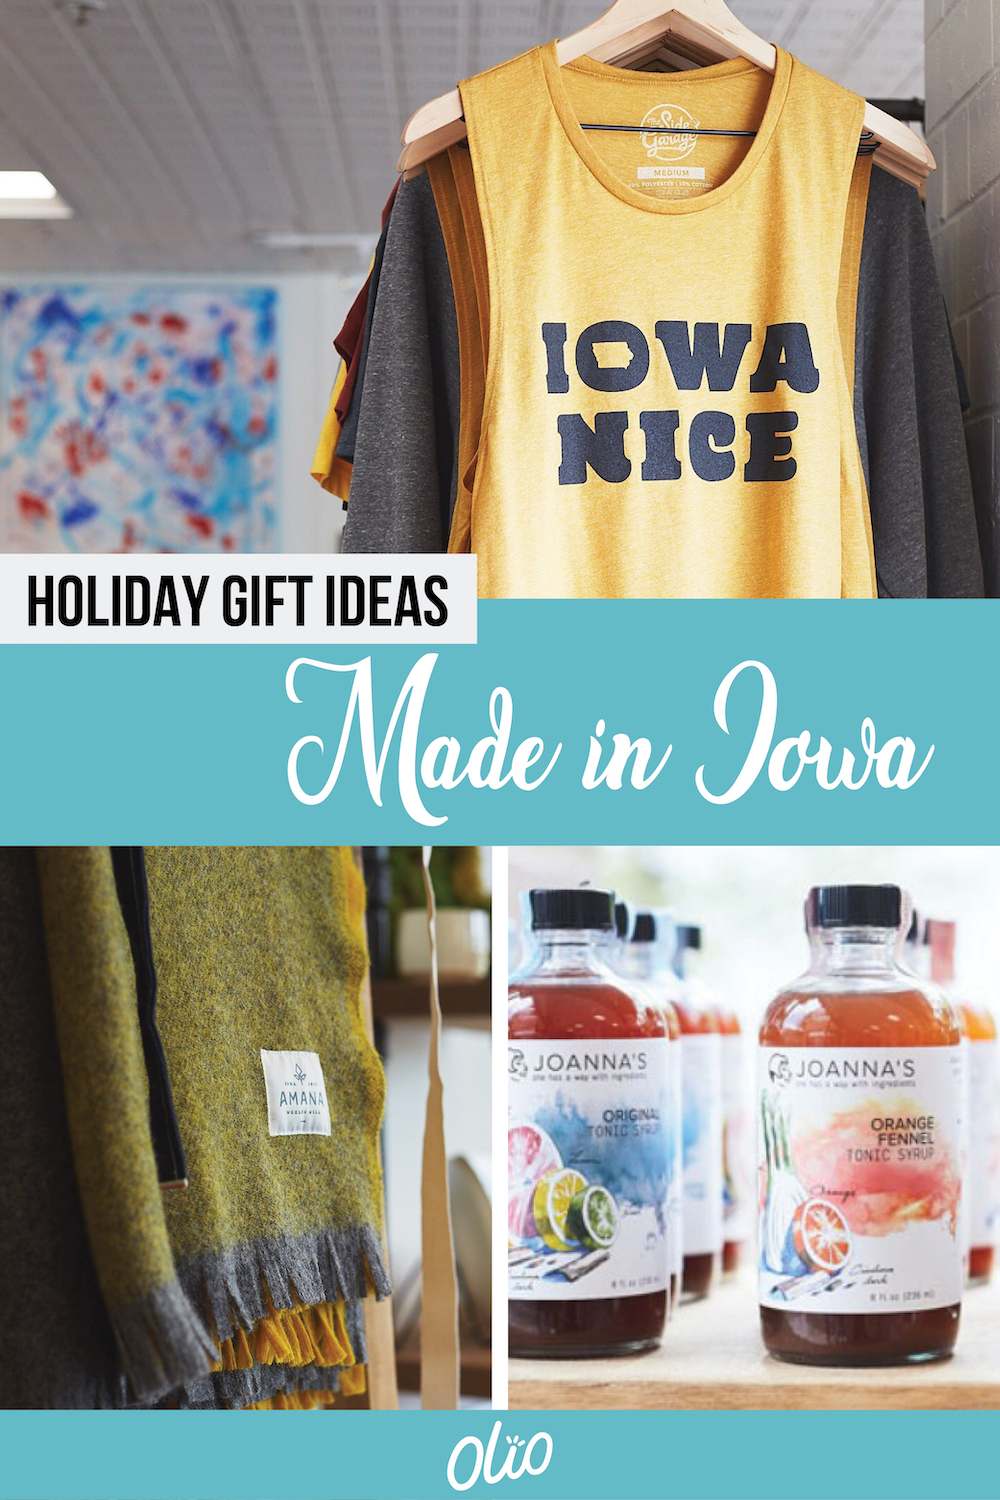 Shop local this season with unique made-in-Iowa gifts! With Travel Iowa's selection of Midwestern gifts there's something for everyone on your holiday list. #Iowa #TravelIowa #MadeInIowa